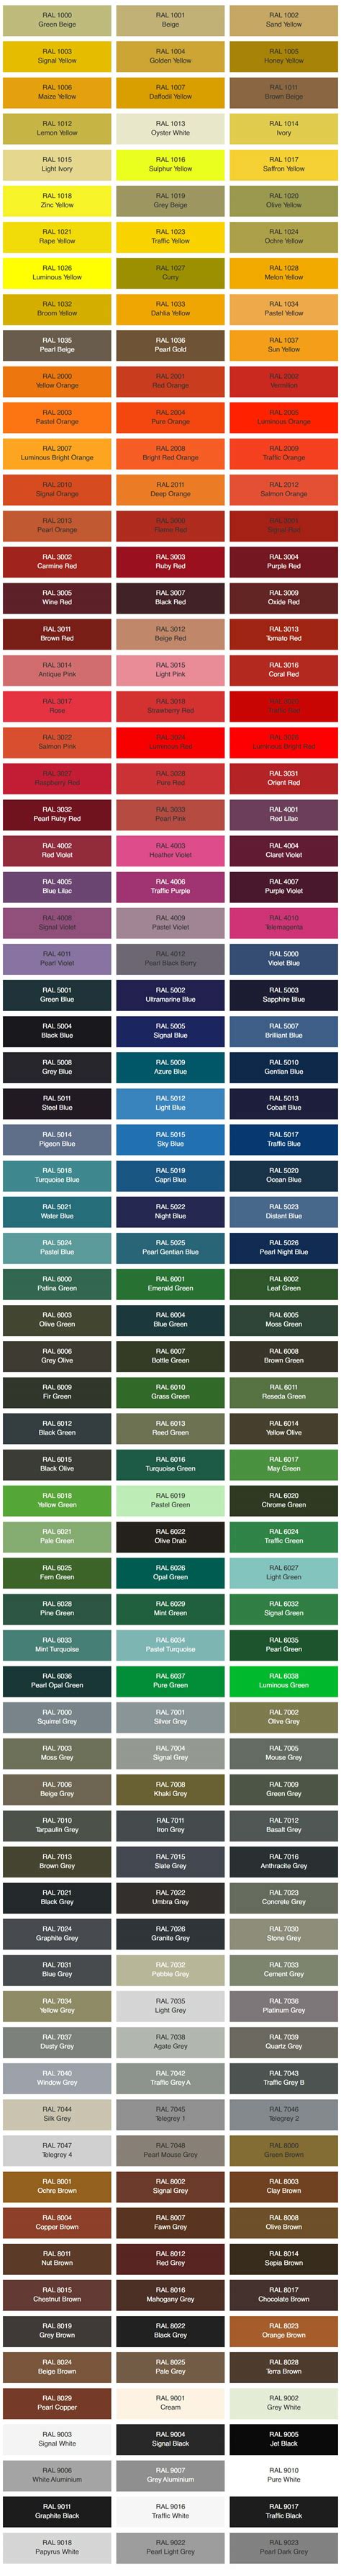 Ral Color Codes